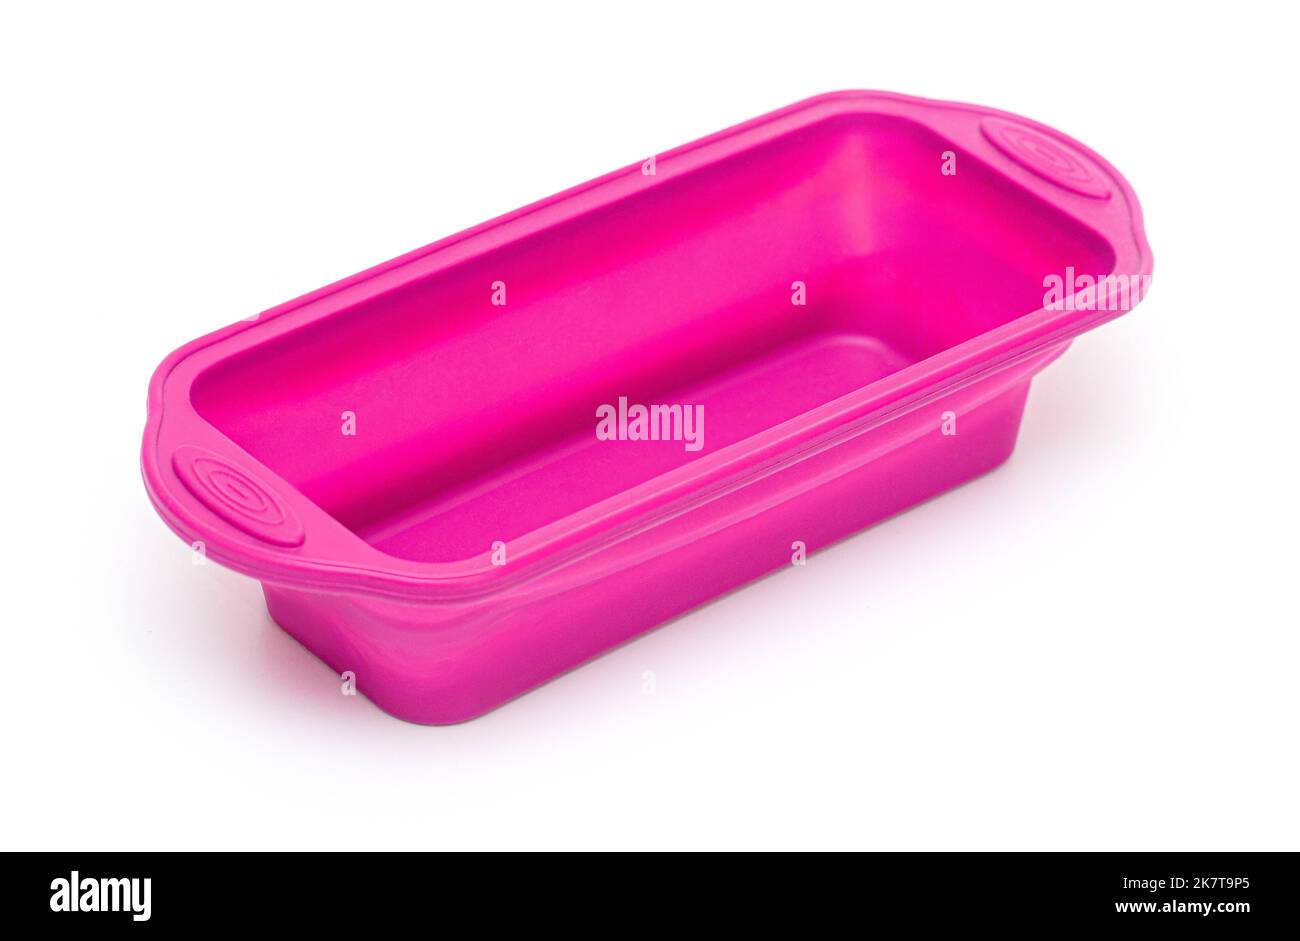 https://c8.alamy.com/comp/2K7T9P5/rectangular-silicone-cookie-baking-dish-isolated-on-a-white-background-2K7T9P5.jpg